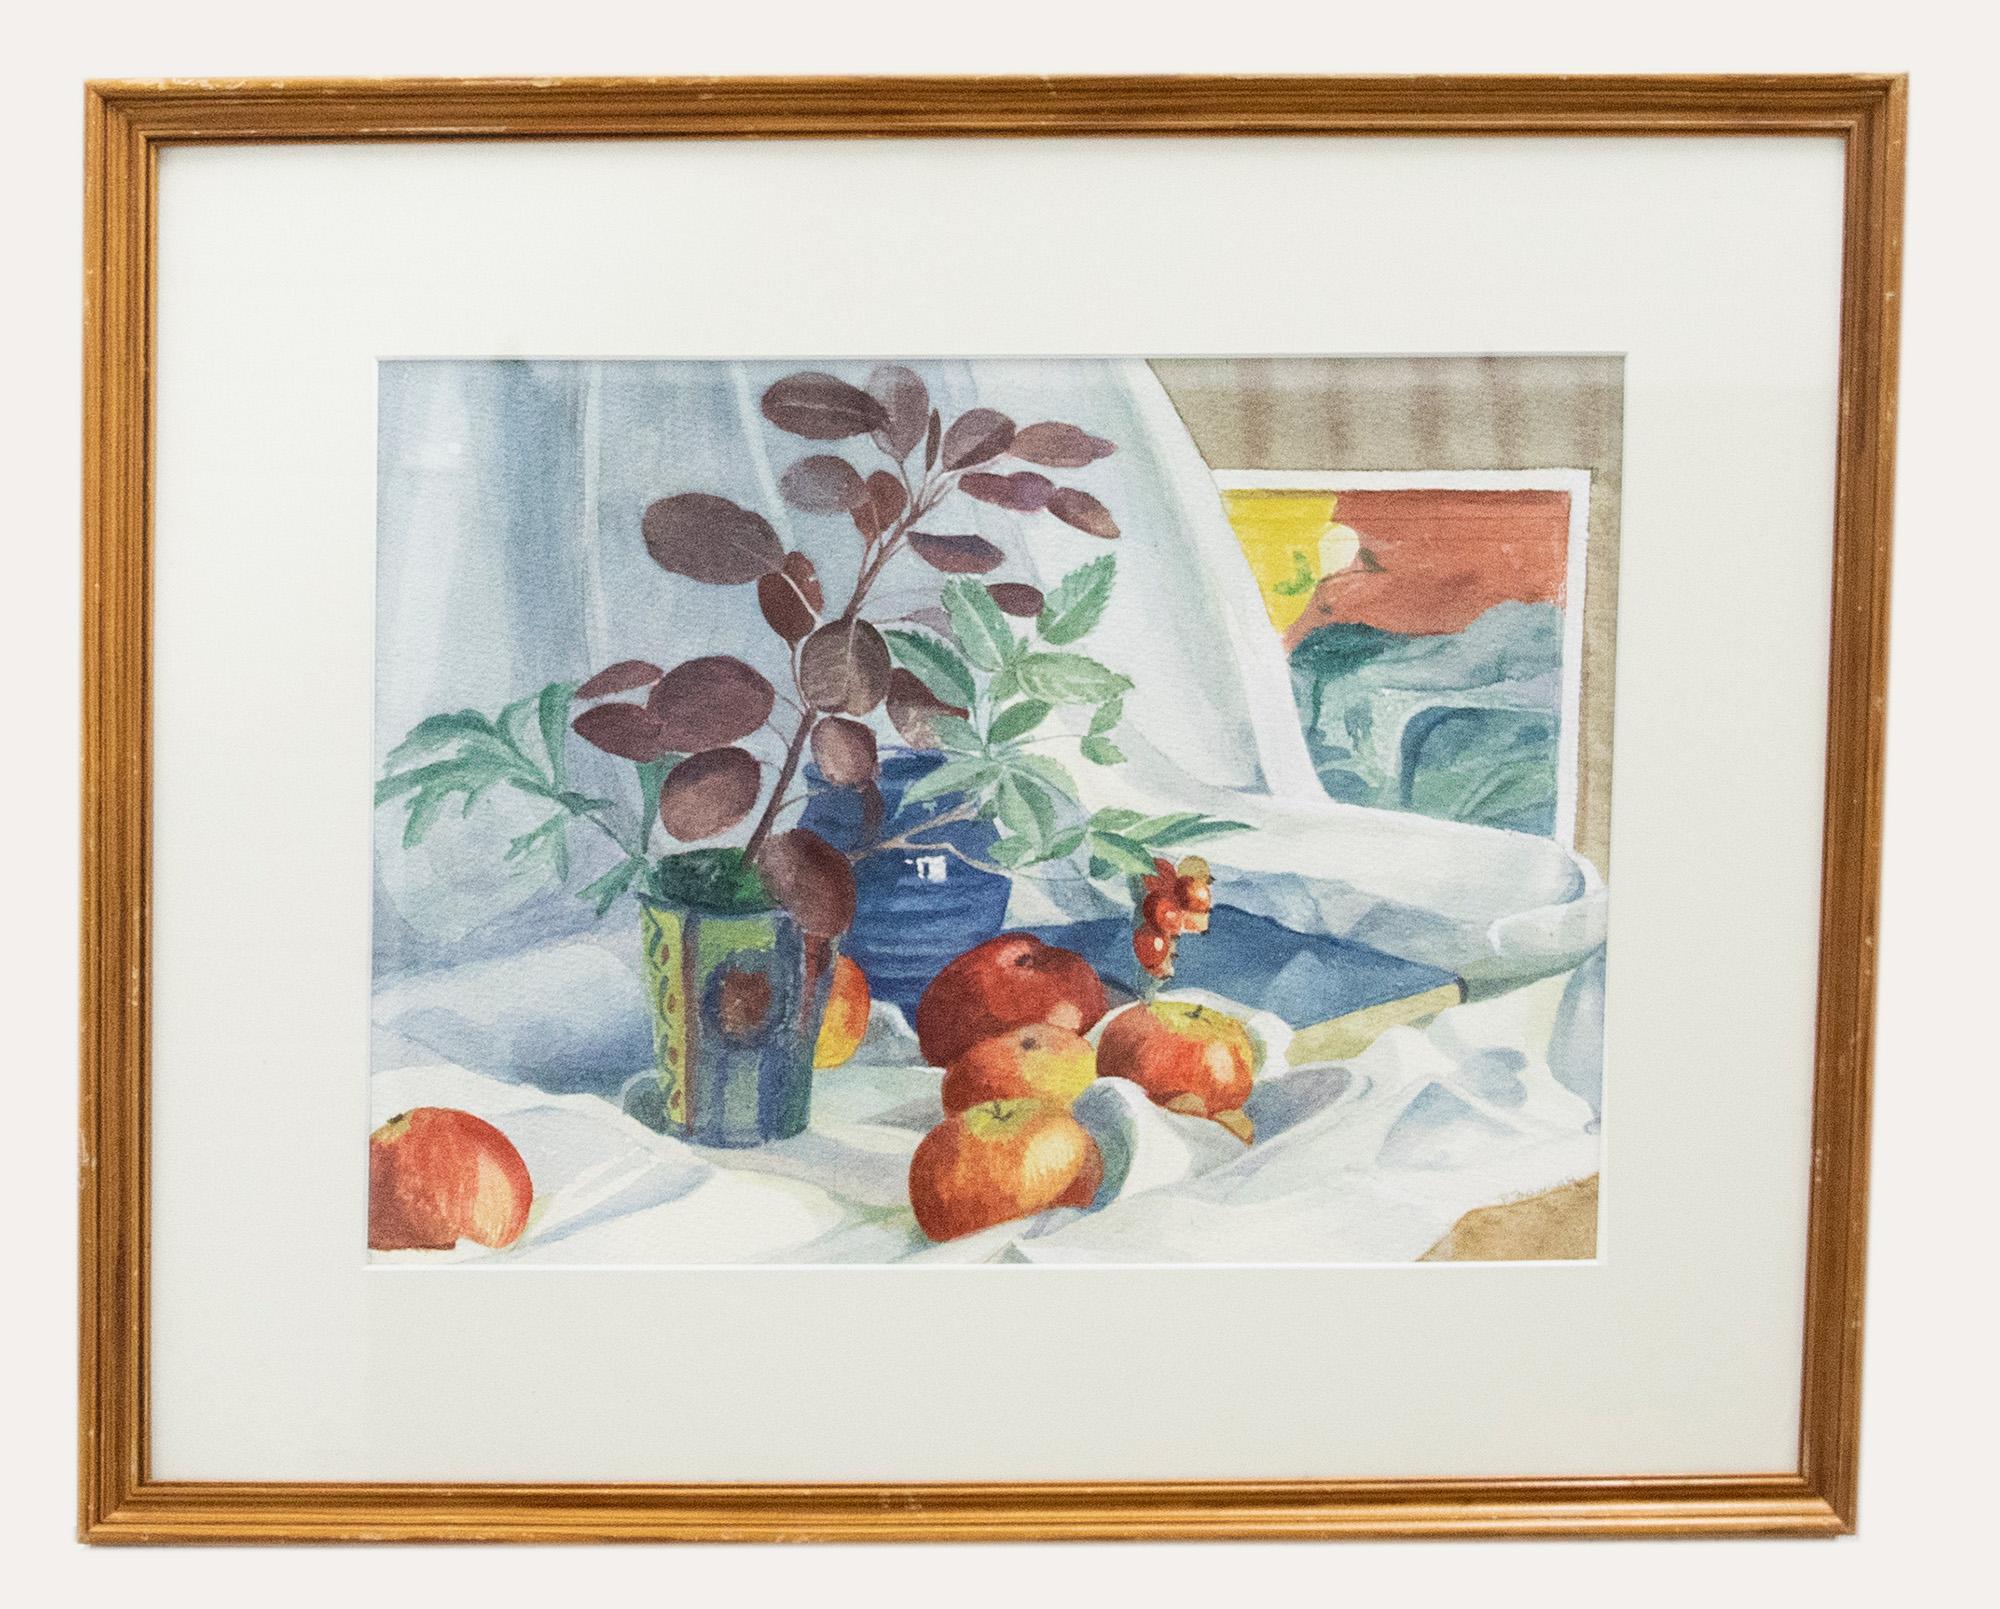 Unknown Still-Life - P. Bowser - 20th Century Watercolour, Apples and Potted Plants